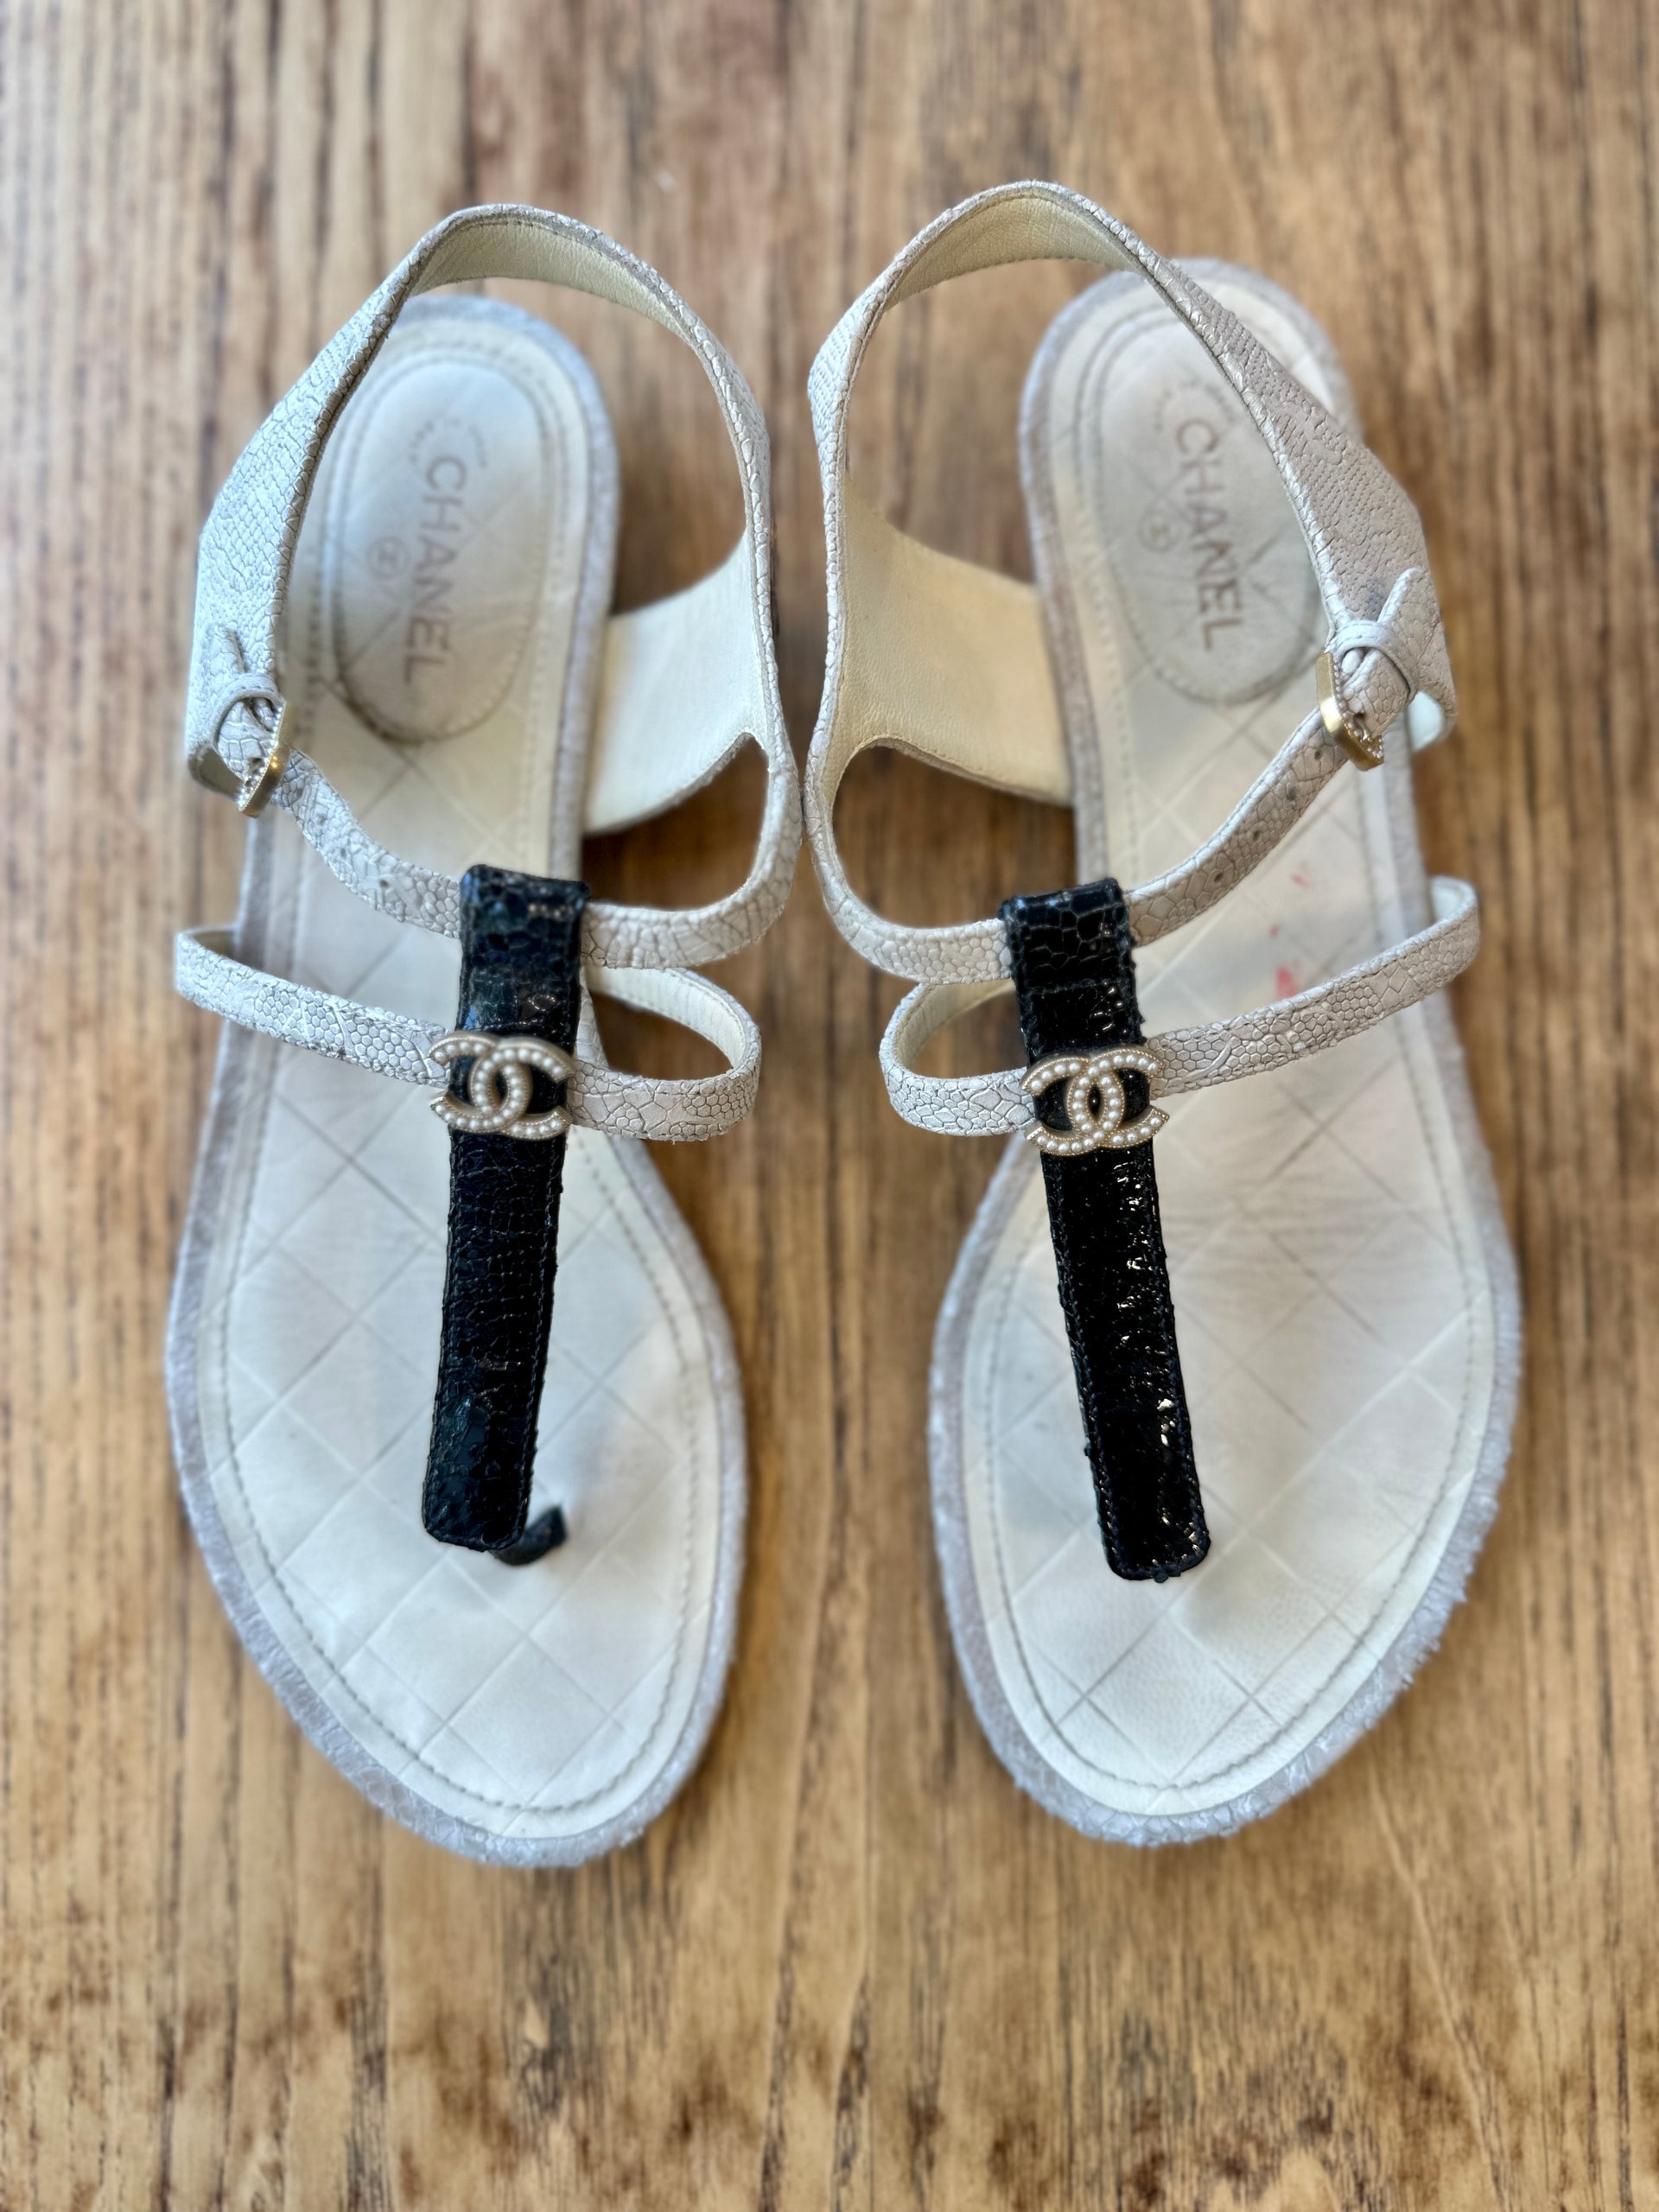 CHANEL leather flat sandals / US9-EU39.5 – Second Edition NY